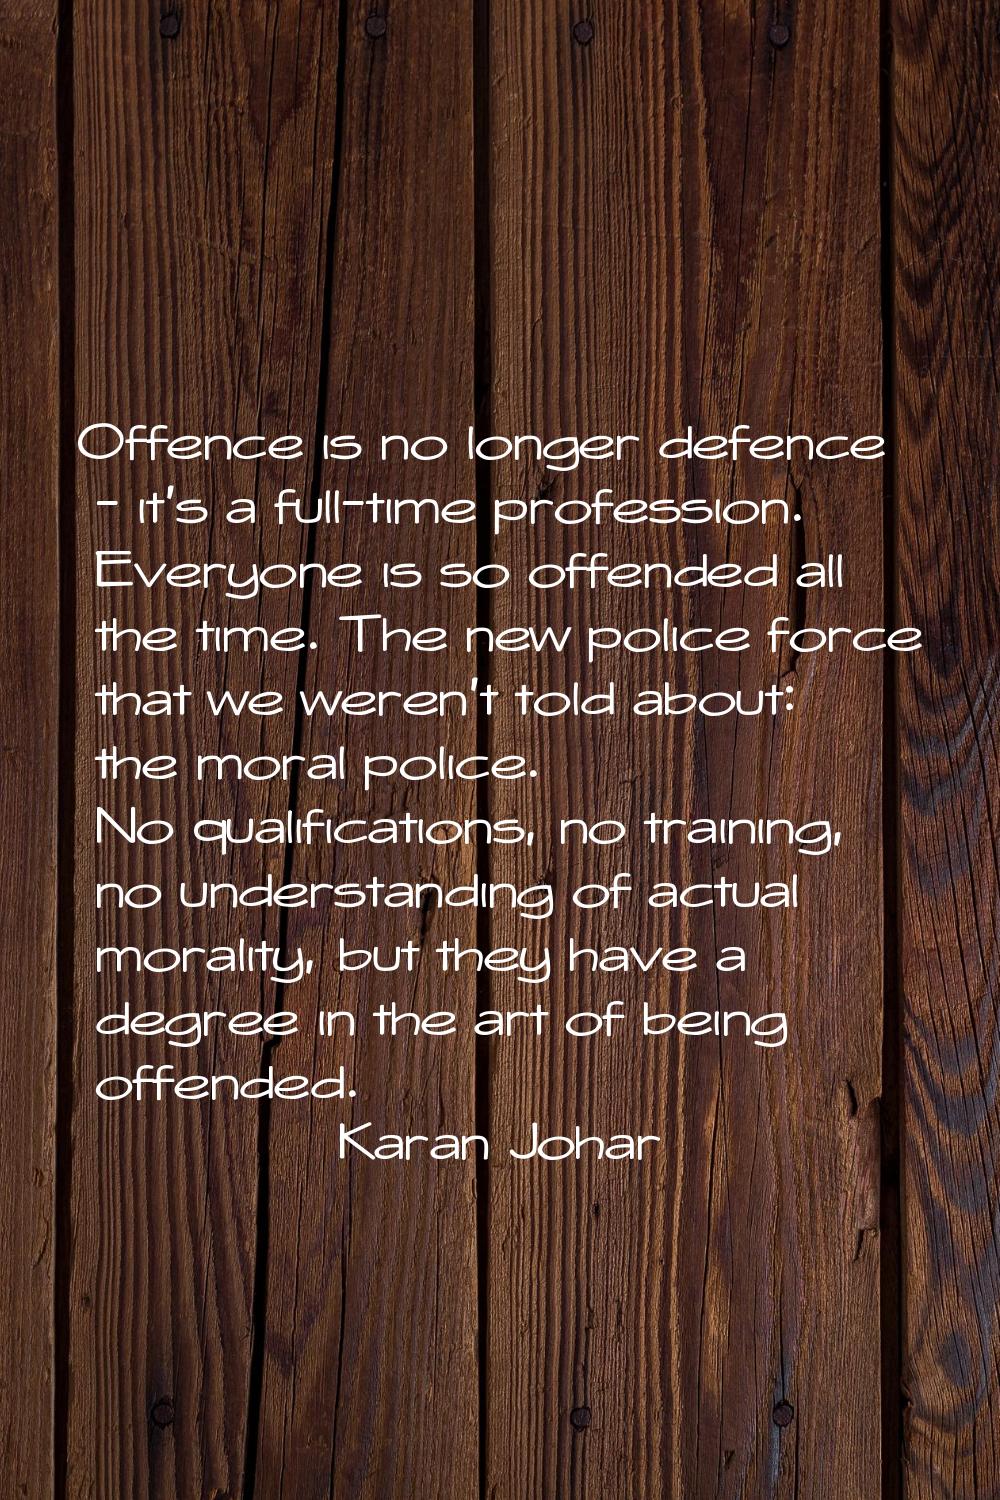 Offence is no longer defence - it's a full-time profession. Everyone is so offended all the time. T